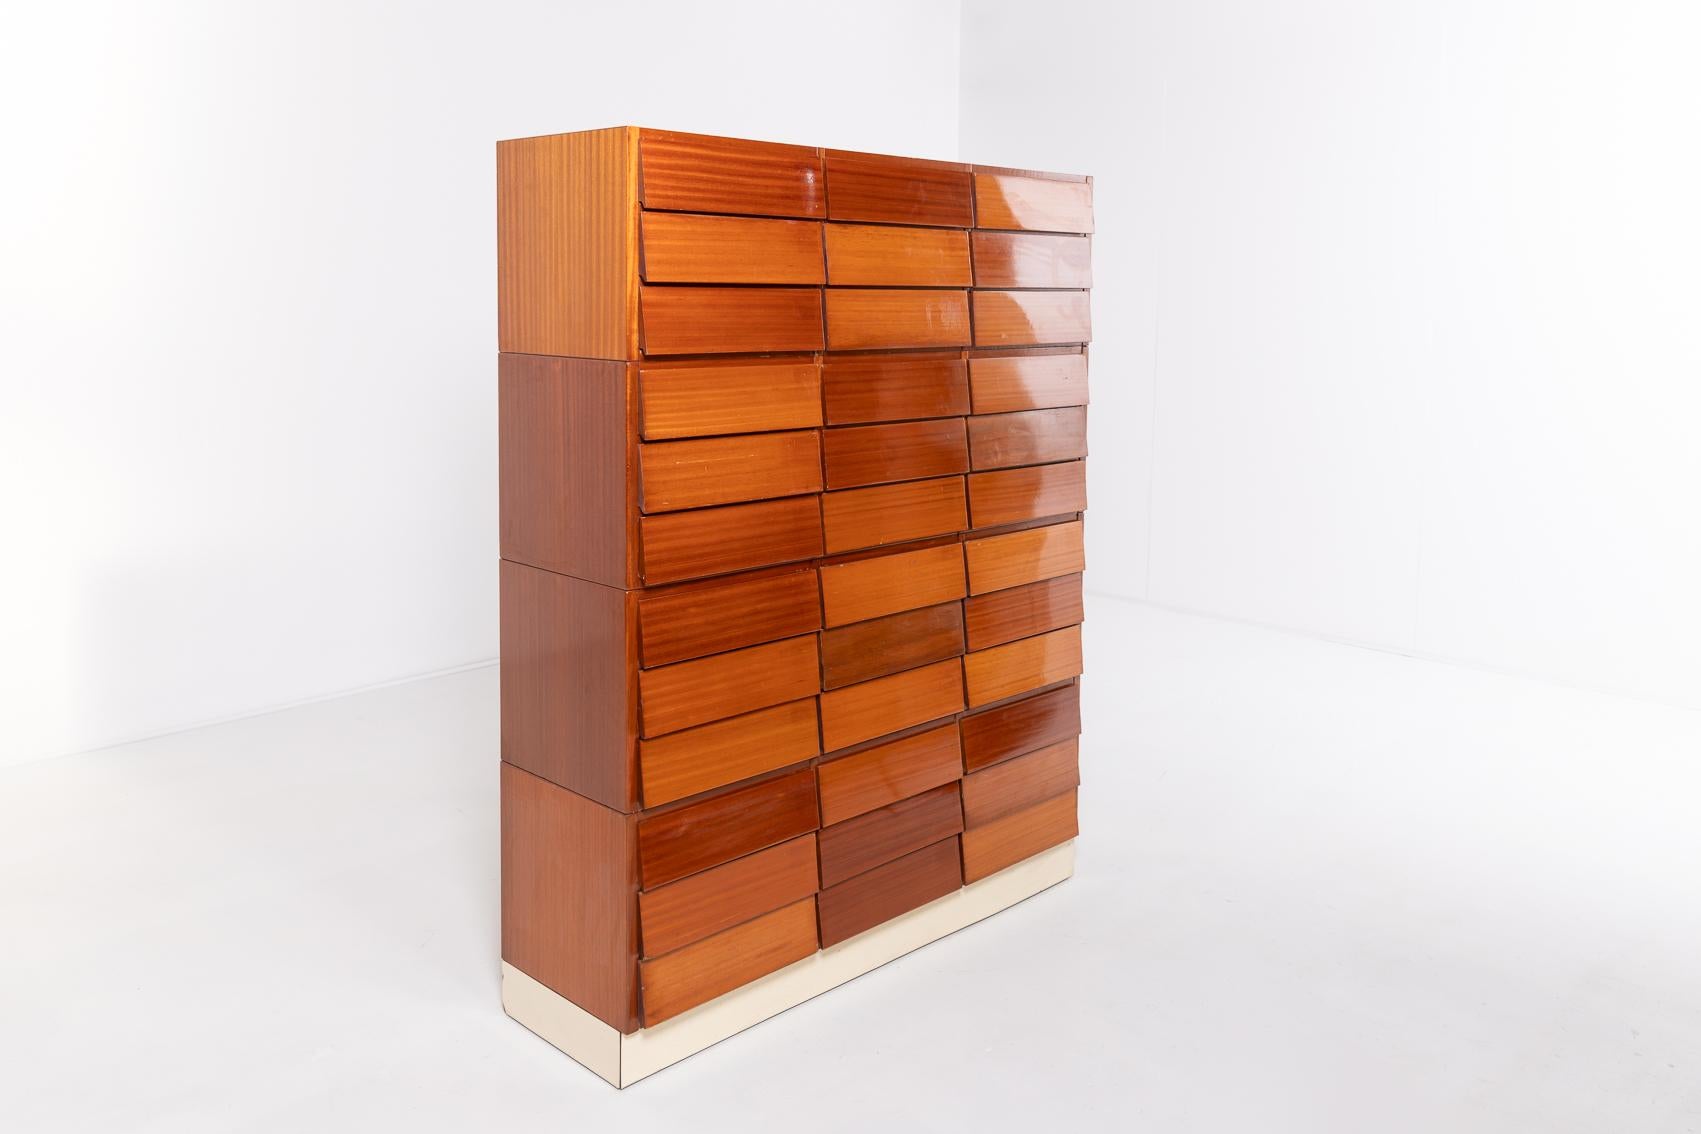 A stunning Italian Mid-Century Modern chest of drawers unit from Schirolli. The unit consists of 4 loose cases with 9 drawers each. Executed in mahogany veneer finish with flap front part.

Condition
Good, usage marks

Dimensions
depth: 40 cm
width: